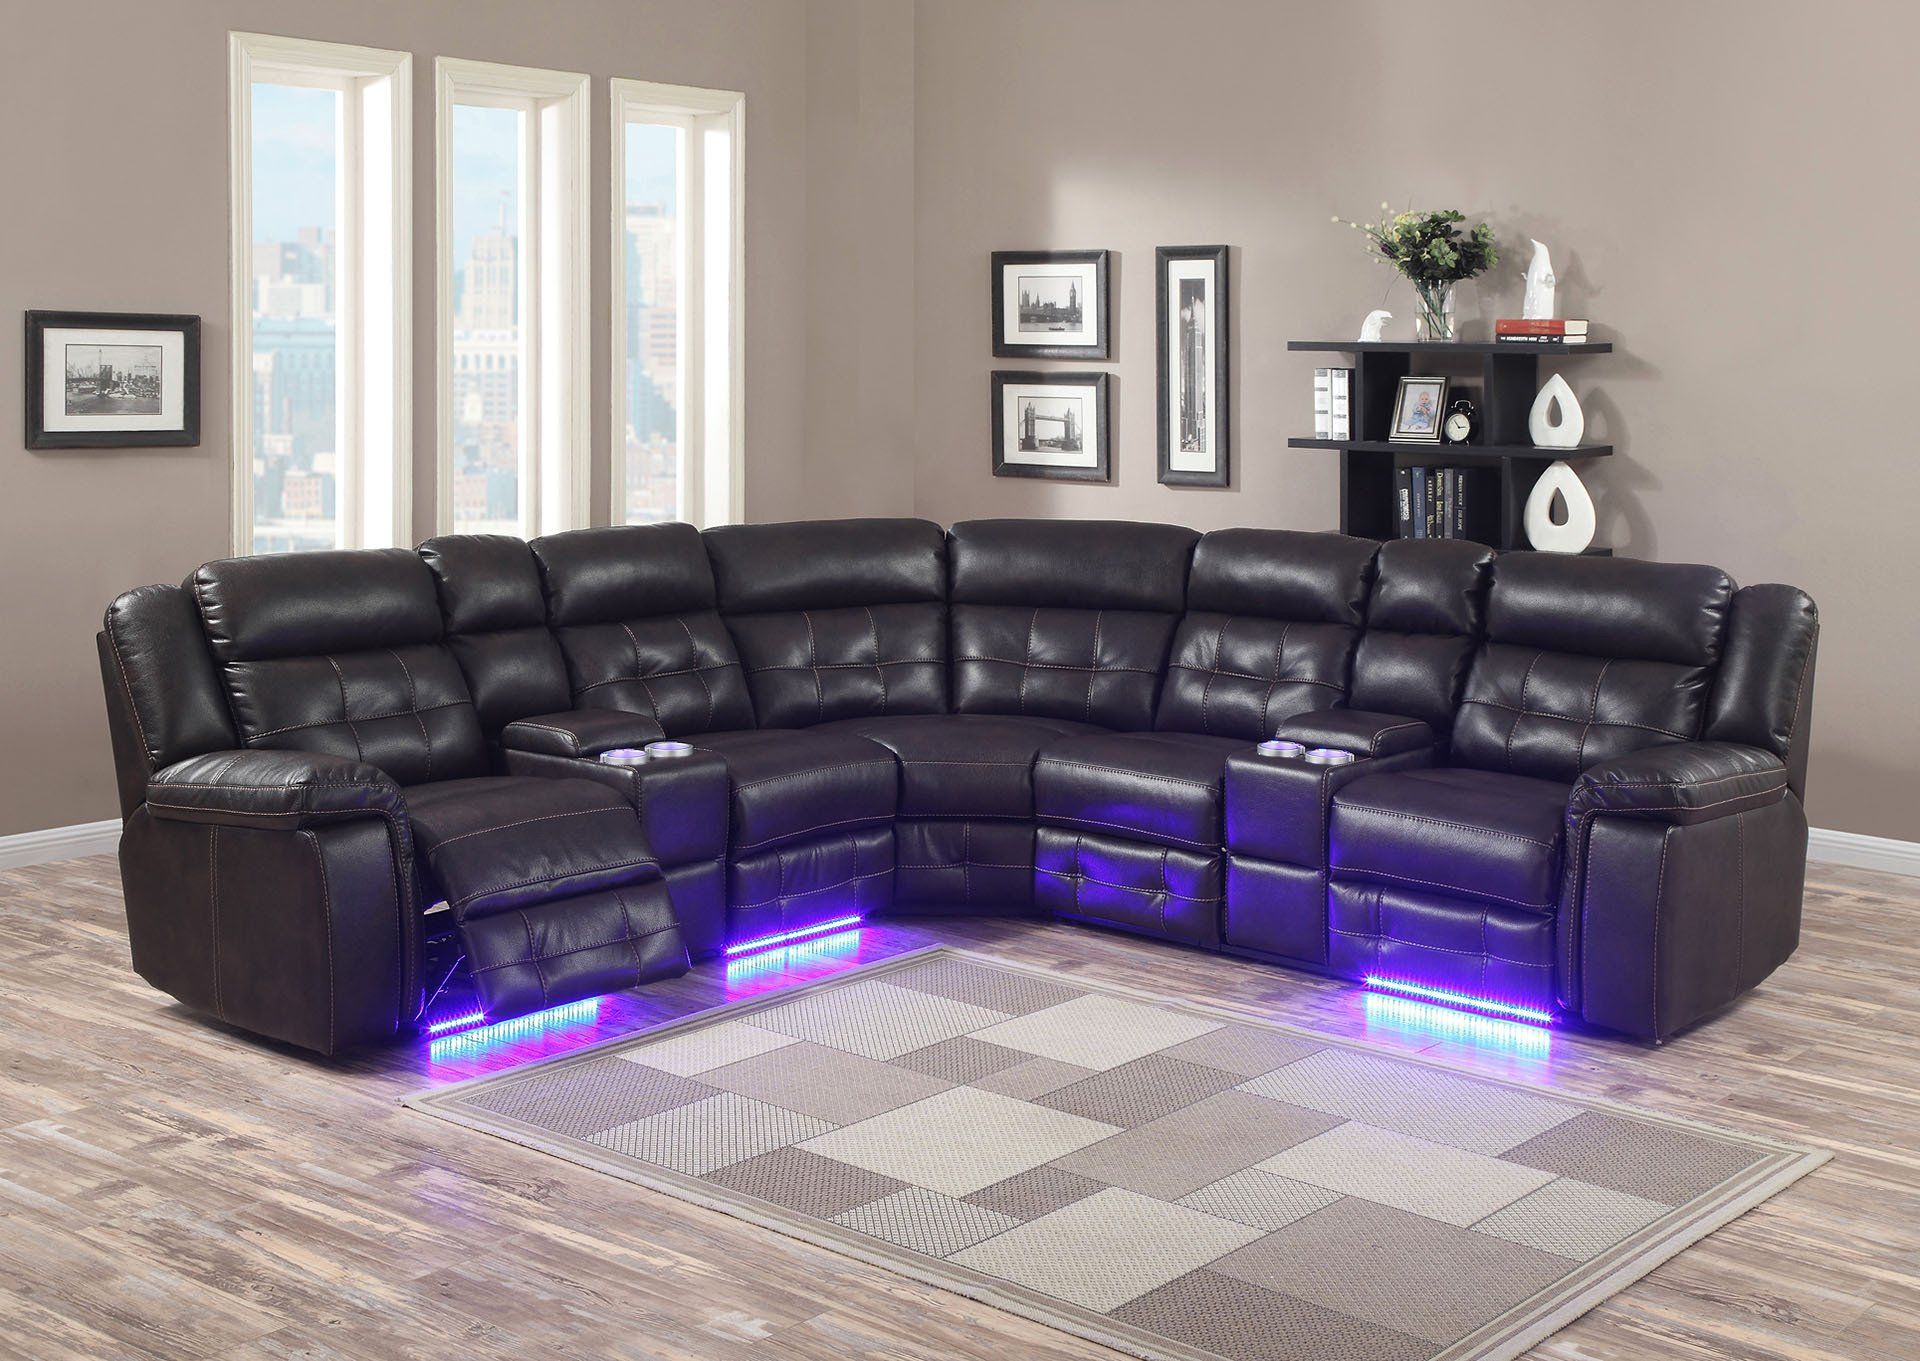 Black leather couch provided by us in Schenectady, NY